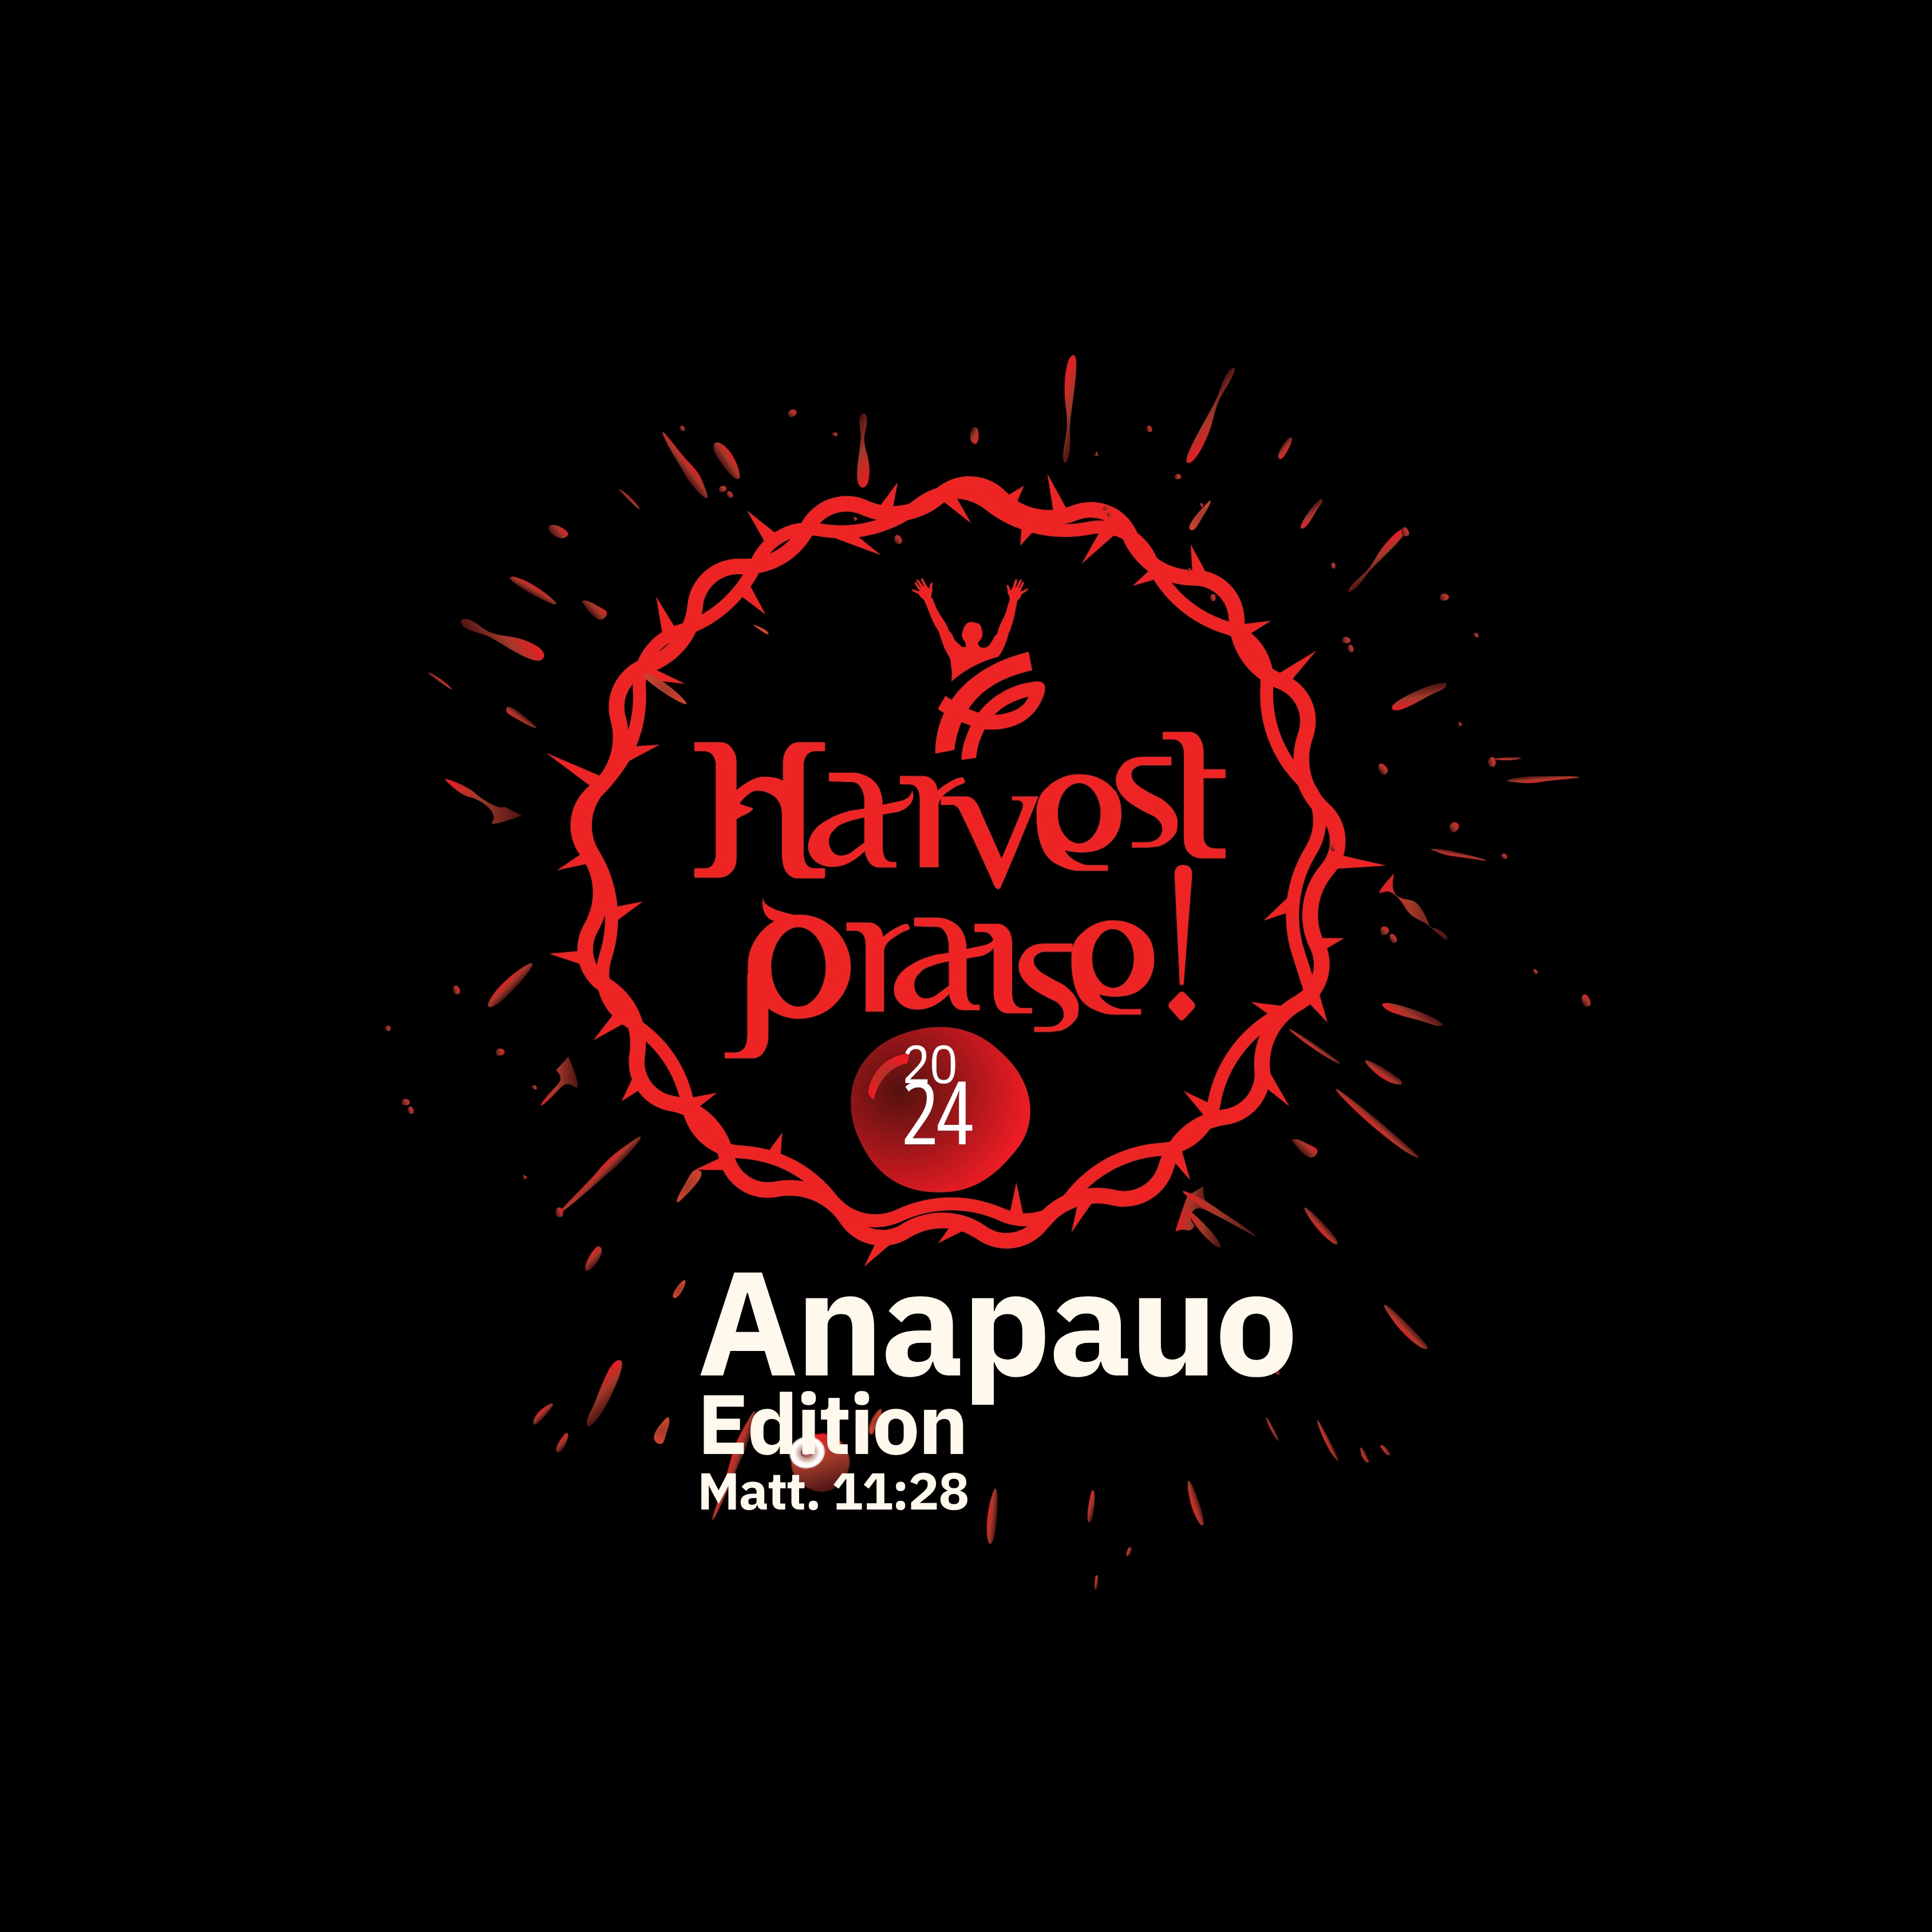 The Anapauo Edition